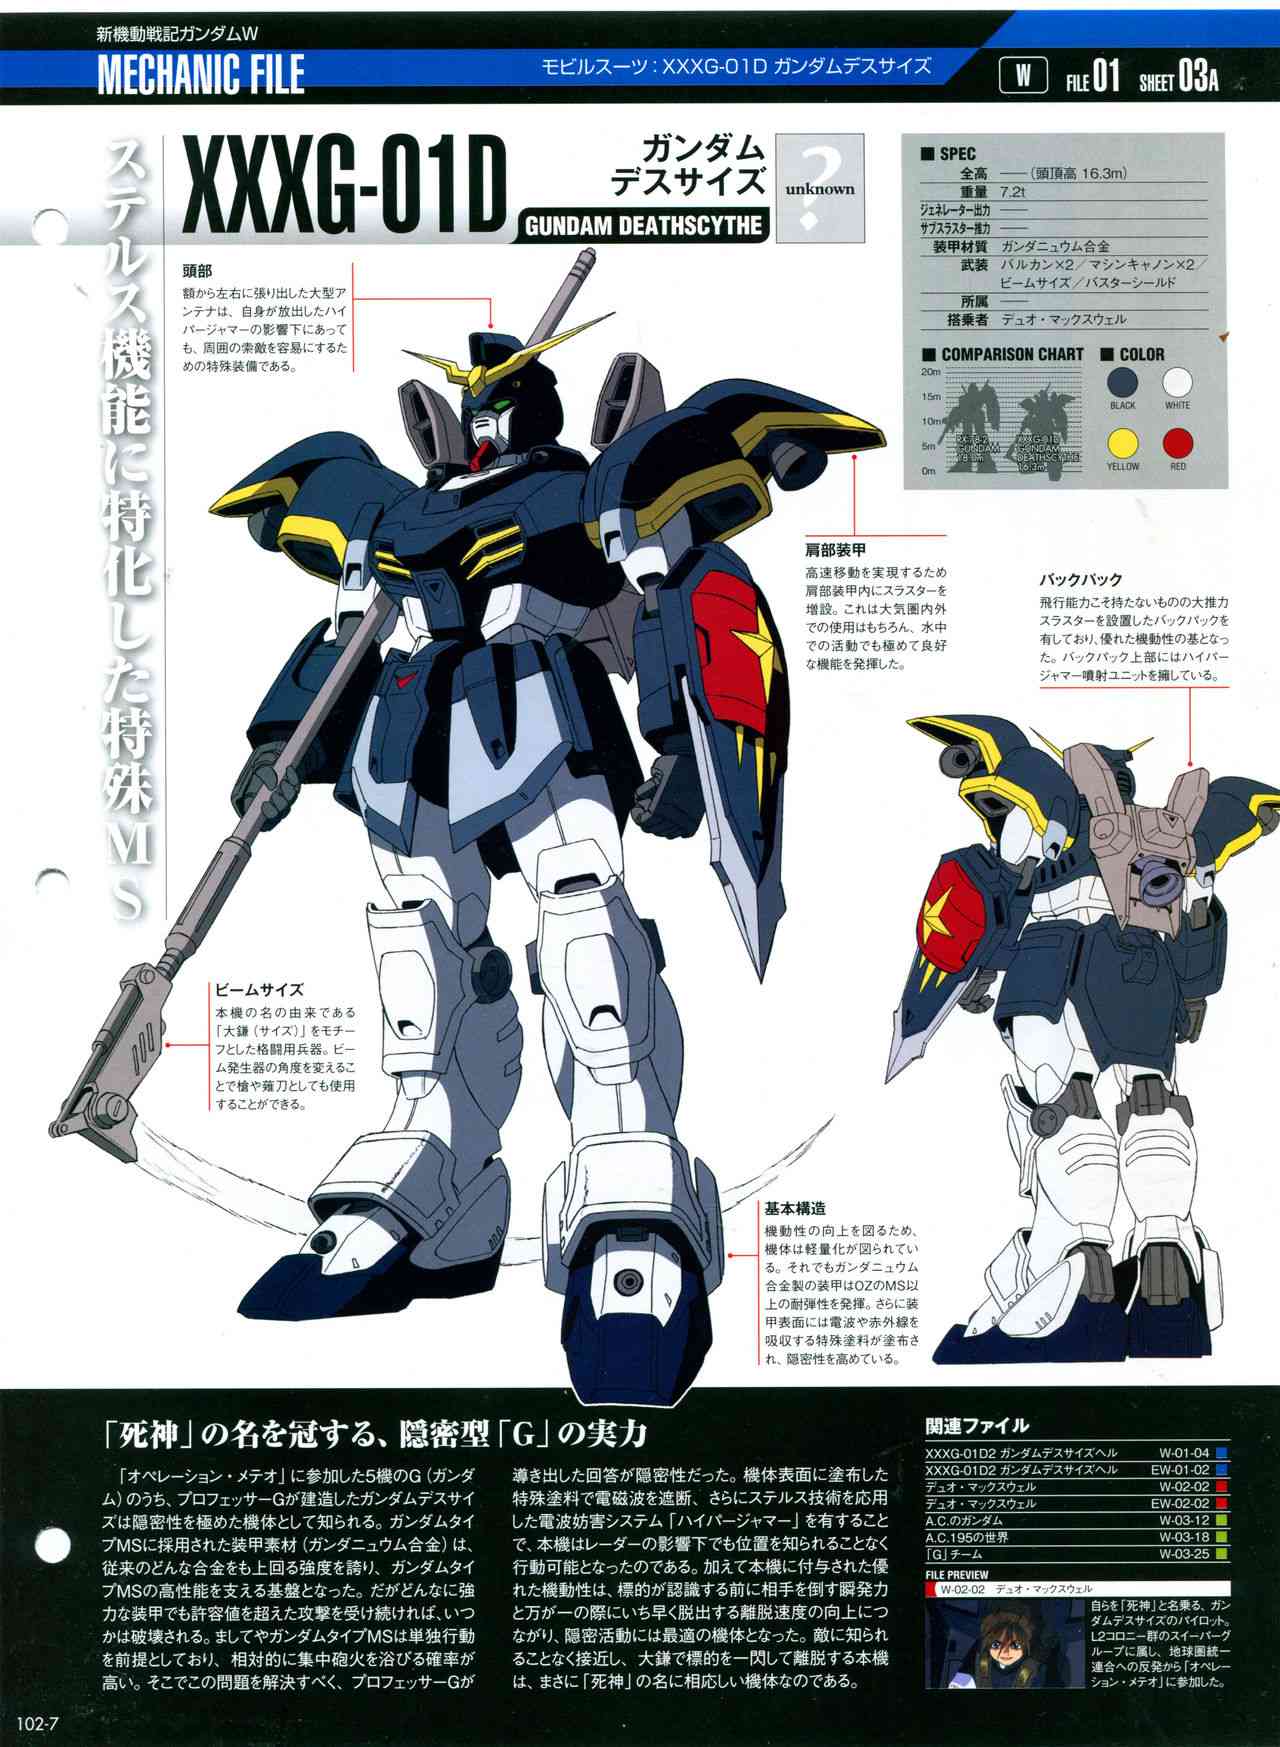 The Official Gundam Perfect File  - 第101-110話(1/8) - 7